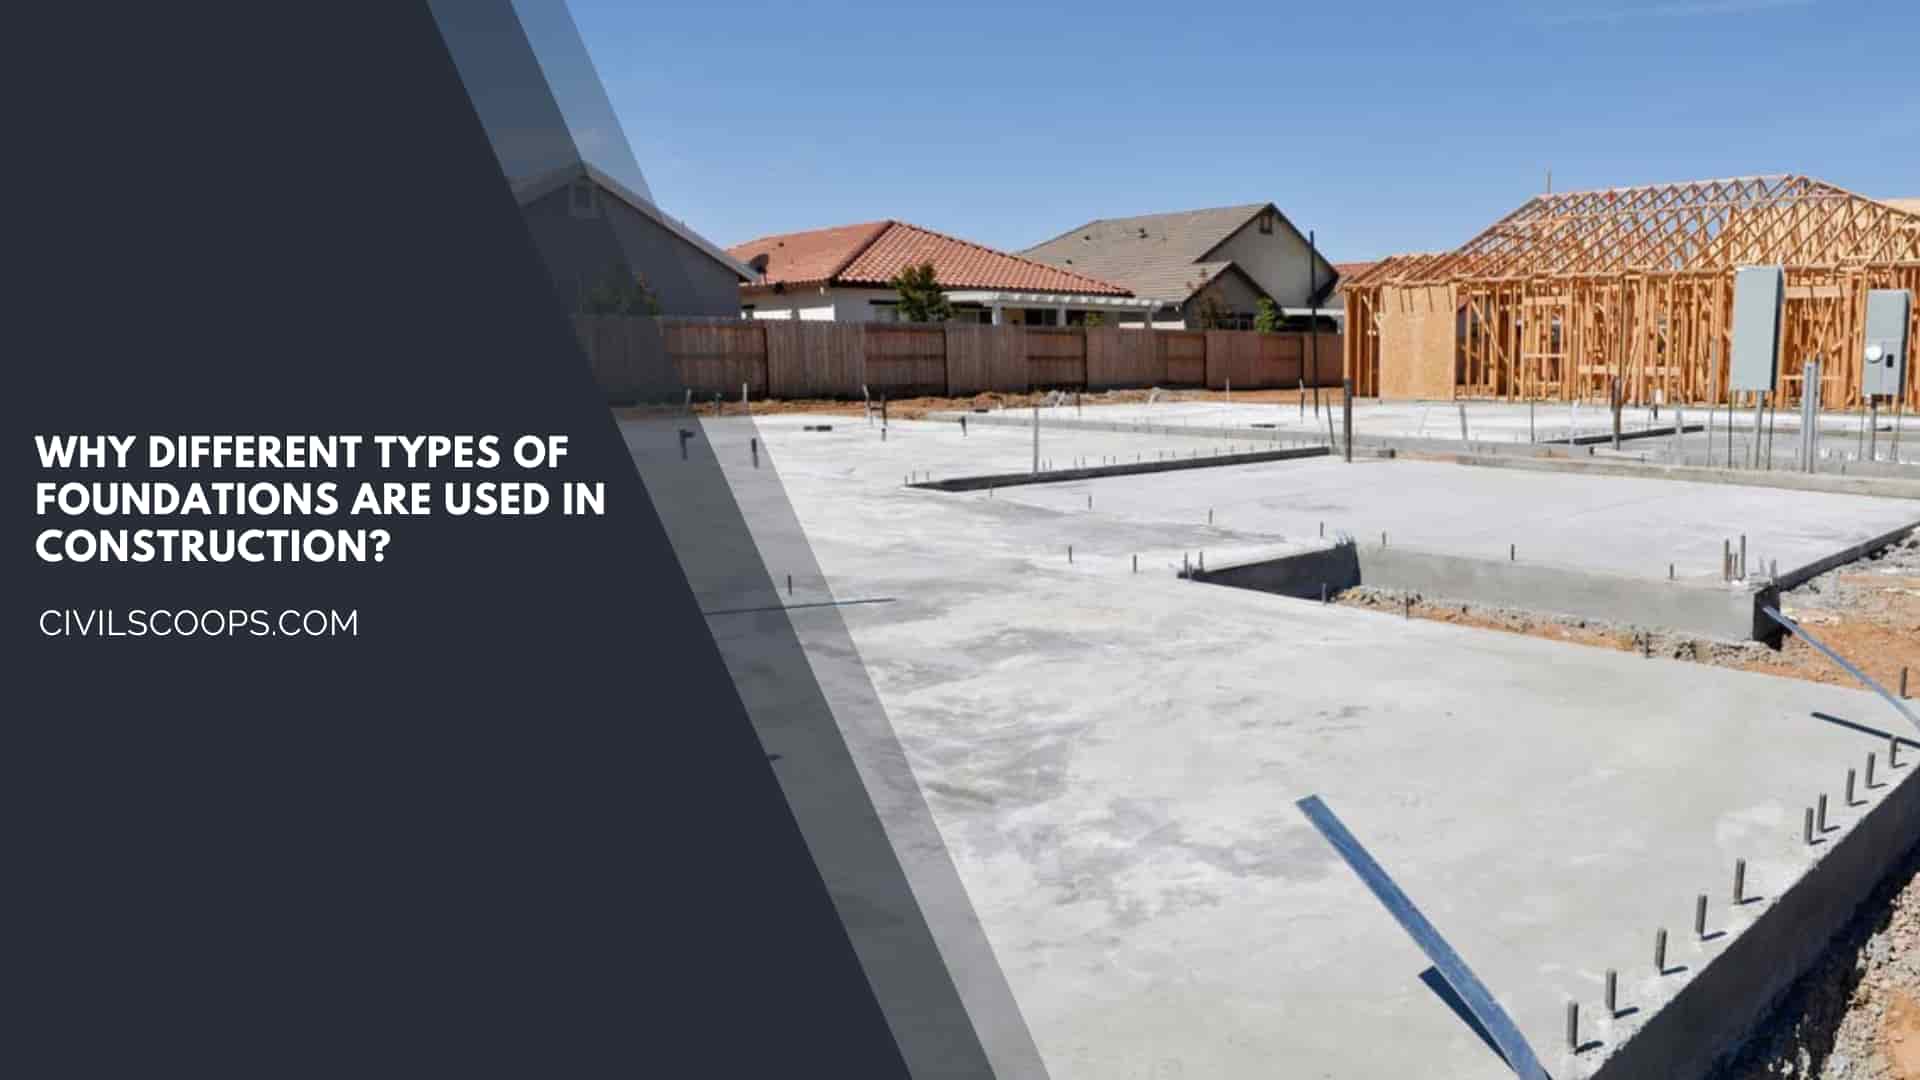 Why Different Types of Foundations Are Used in Construction?